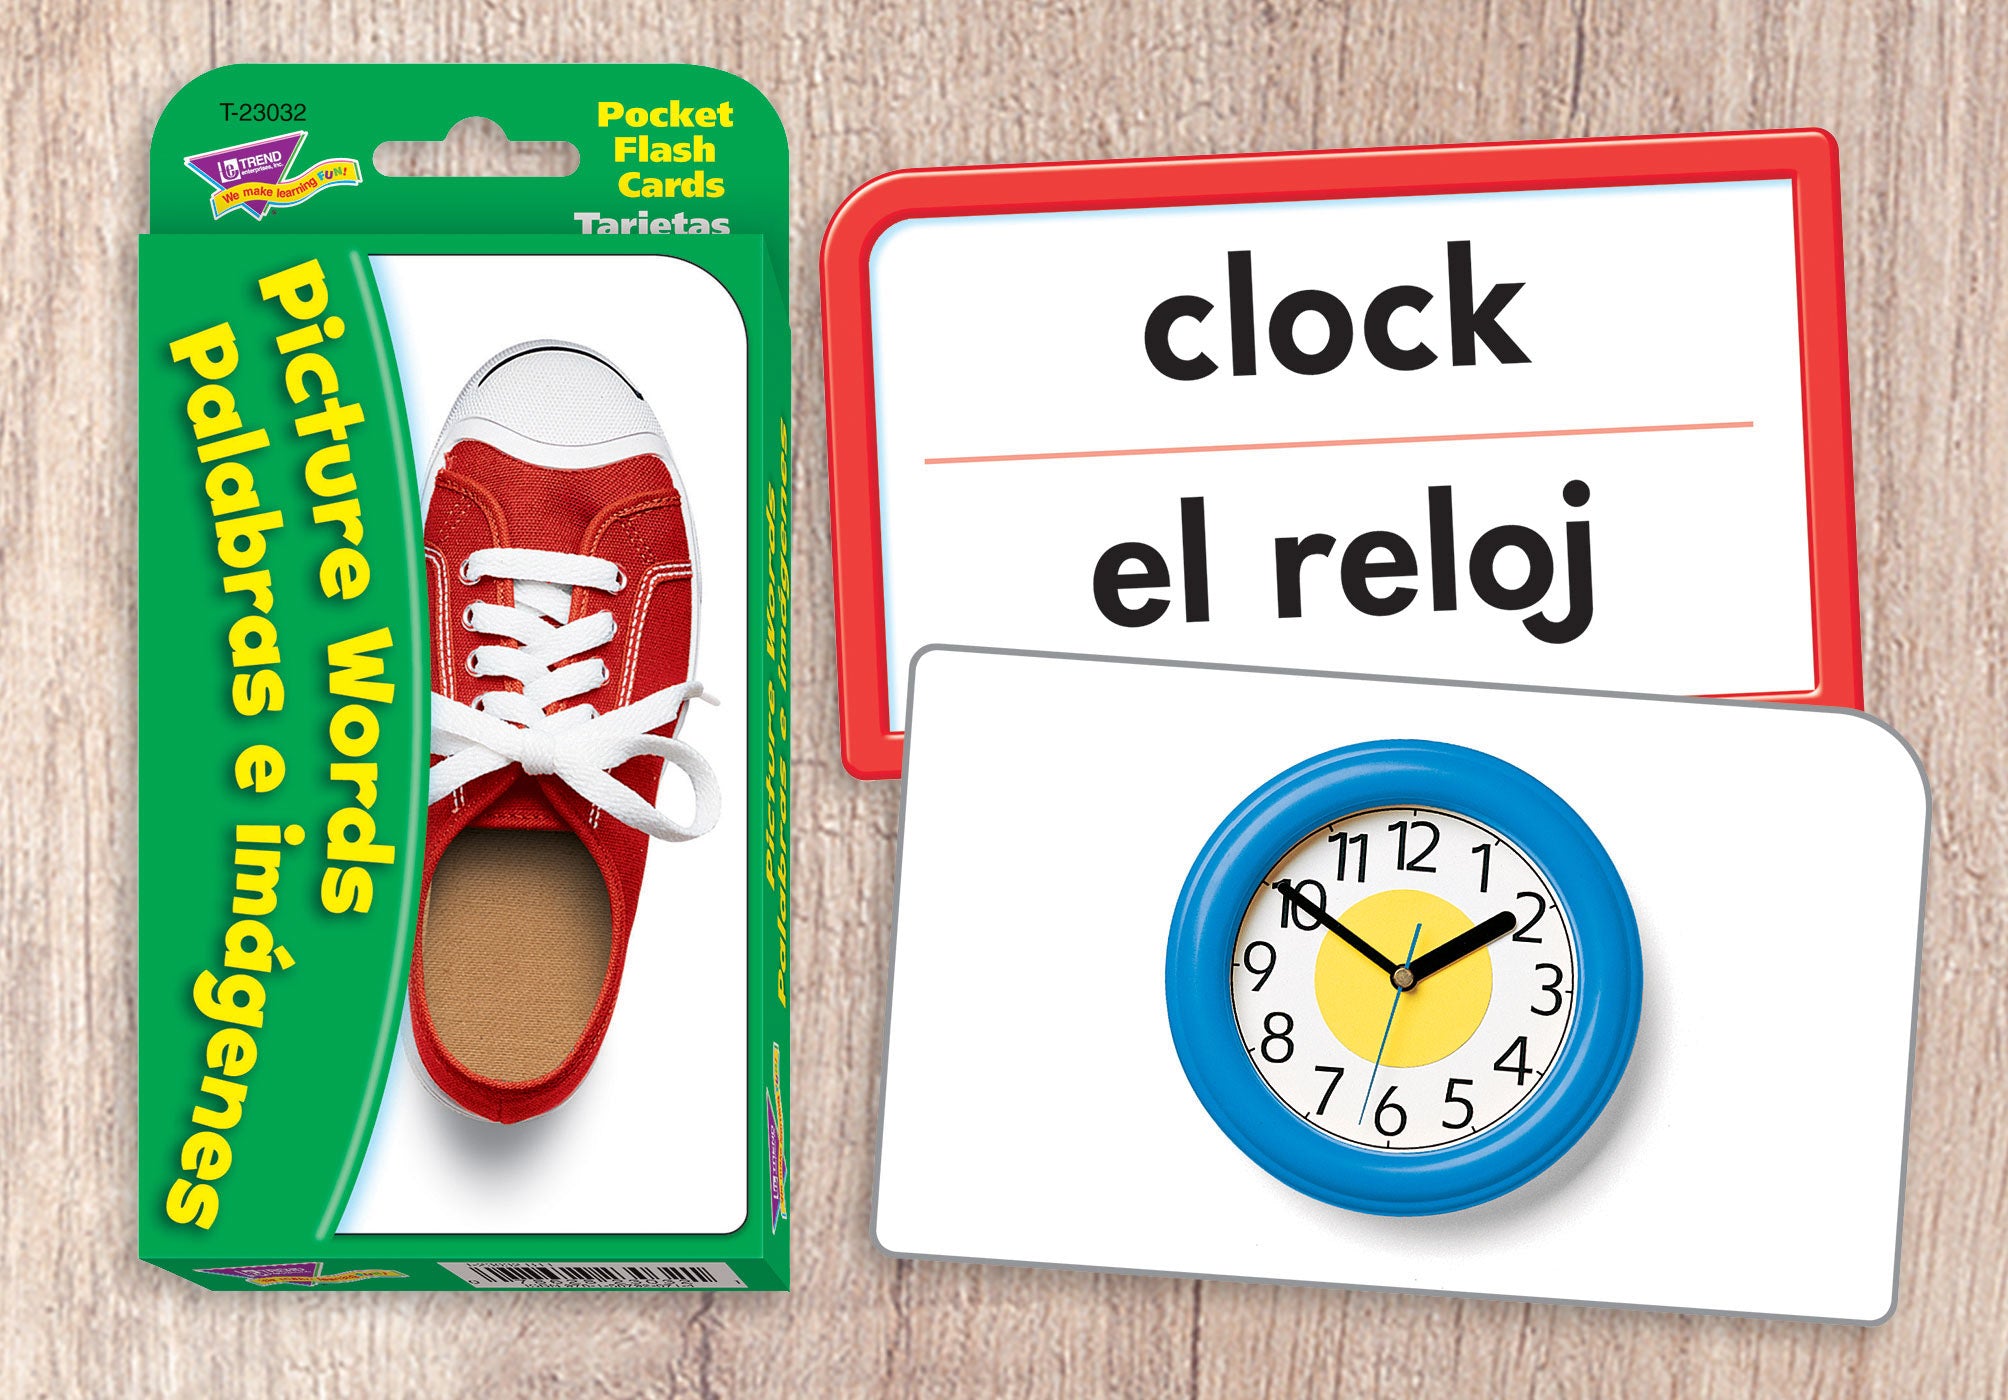 Picture Words/Palabras e imágenes (English/Spanish) Pocket Flash Cards made in USA